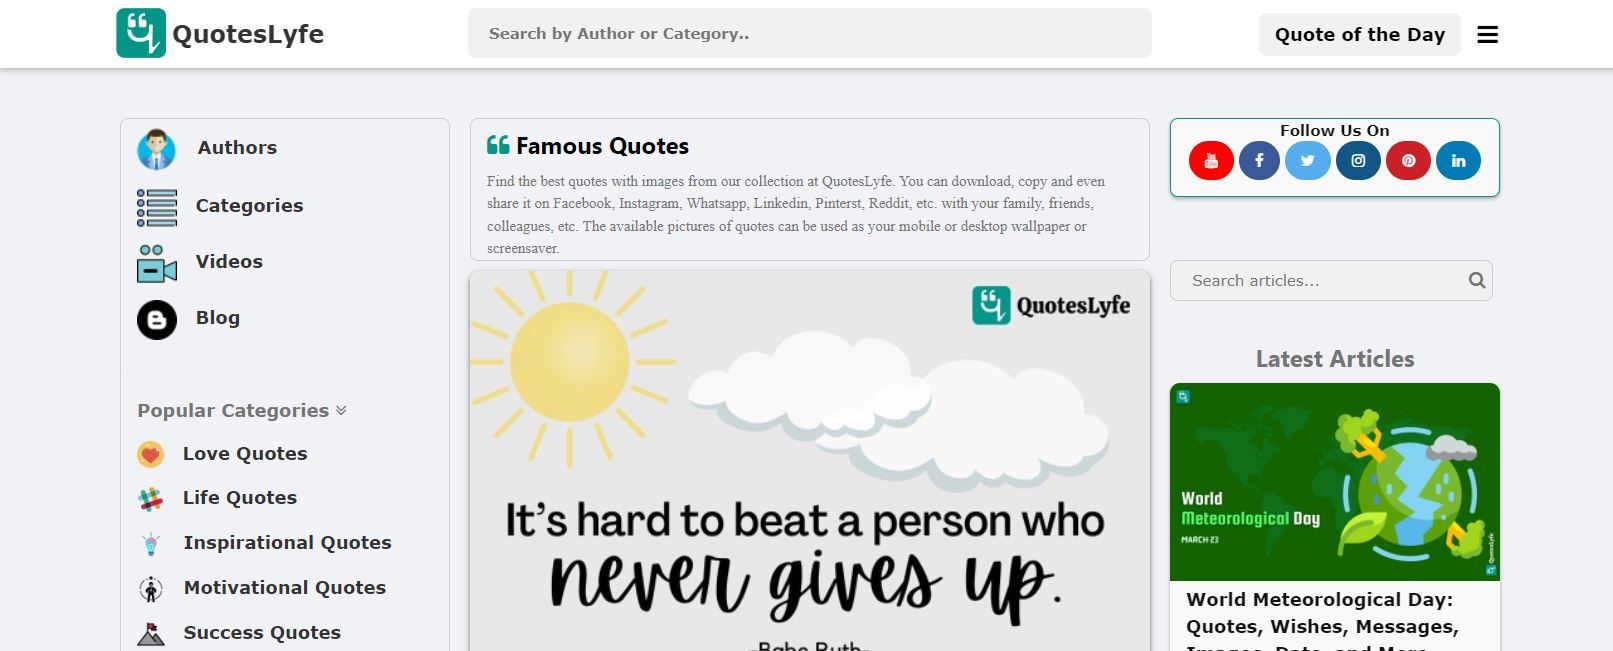 A Screenshot of QuotesLyfe's Website Landing Page